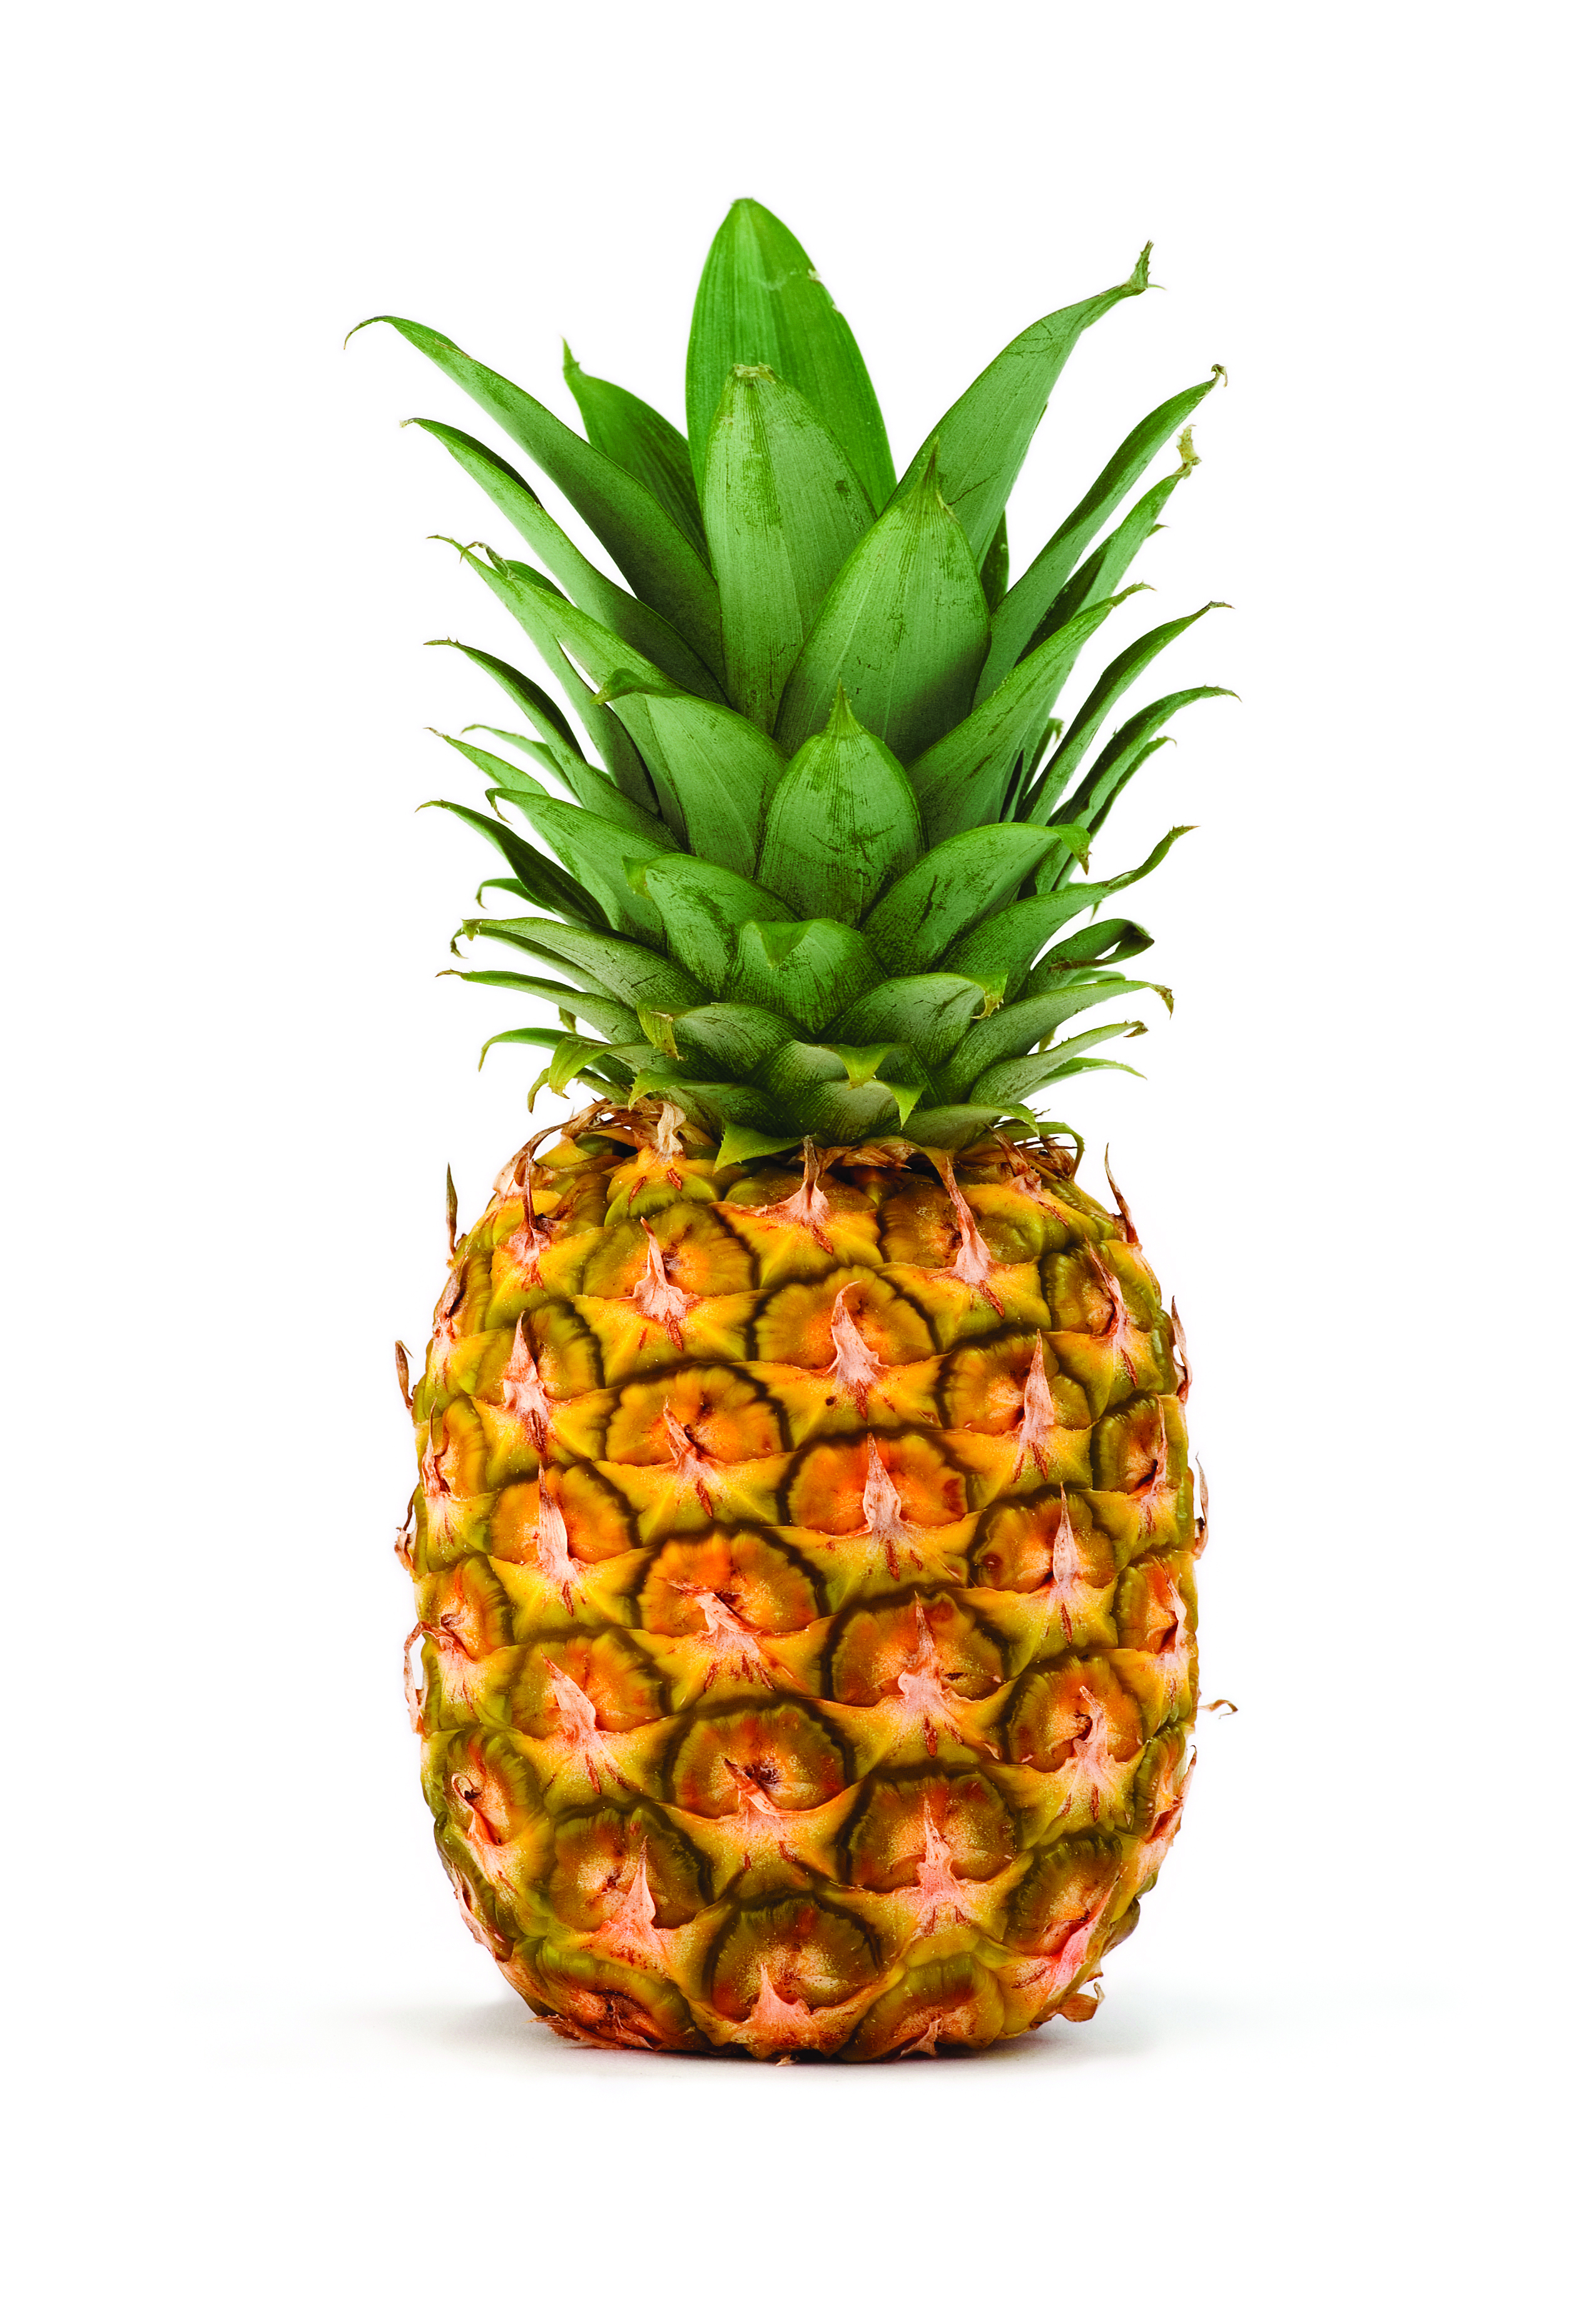 The meaning and symbolism of the word - «Pineapple»